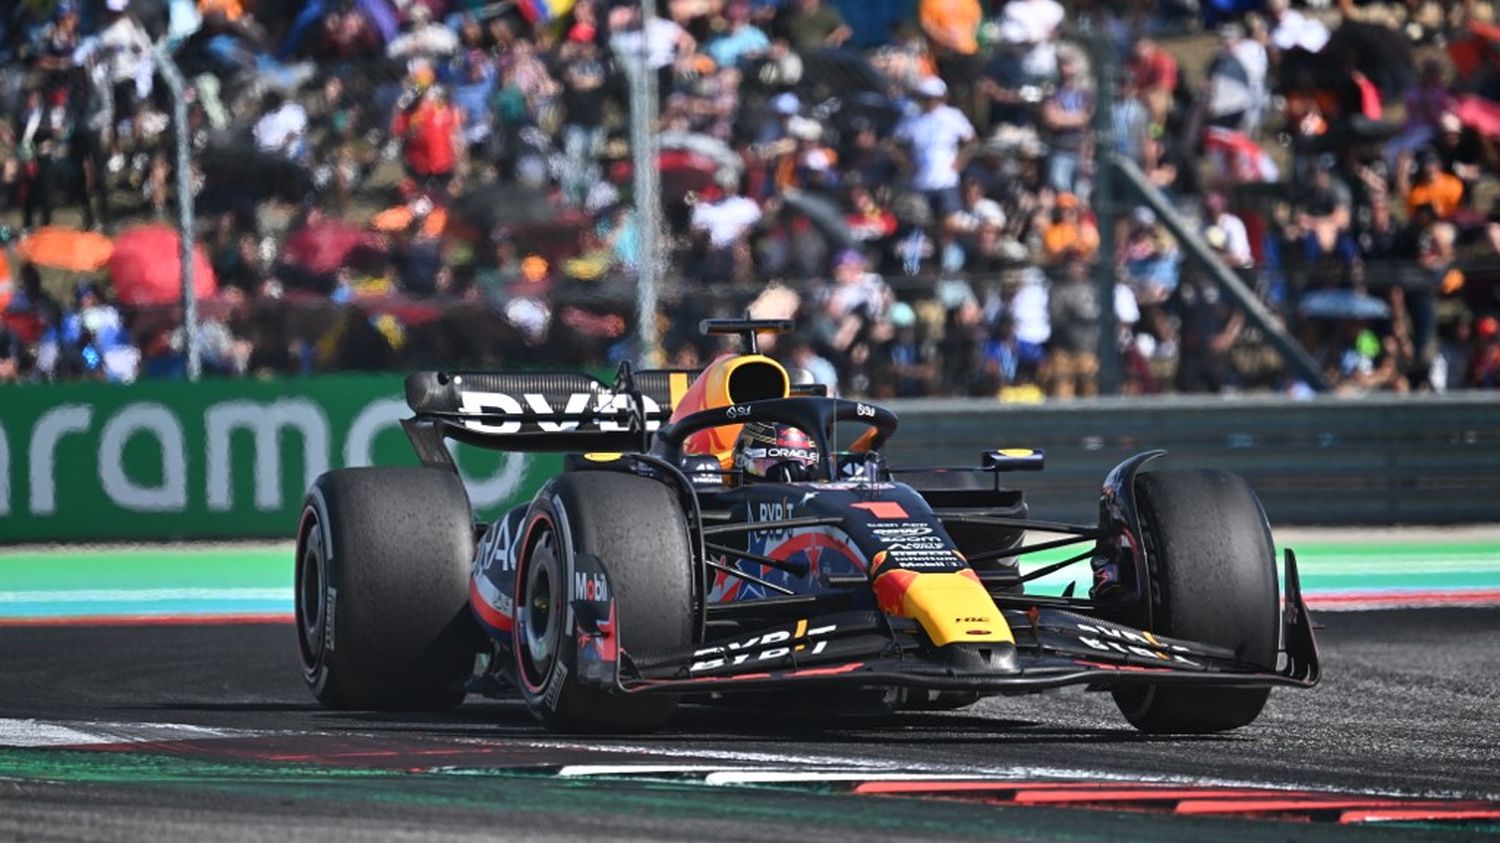 F1: after new return to USA, Max Verstappen offers himself 50th Grand Prix success, Hamilton and Leclerc disqualified